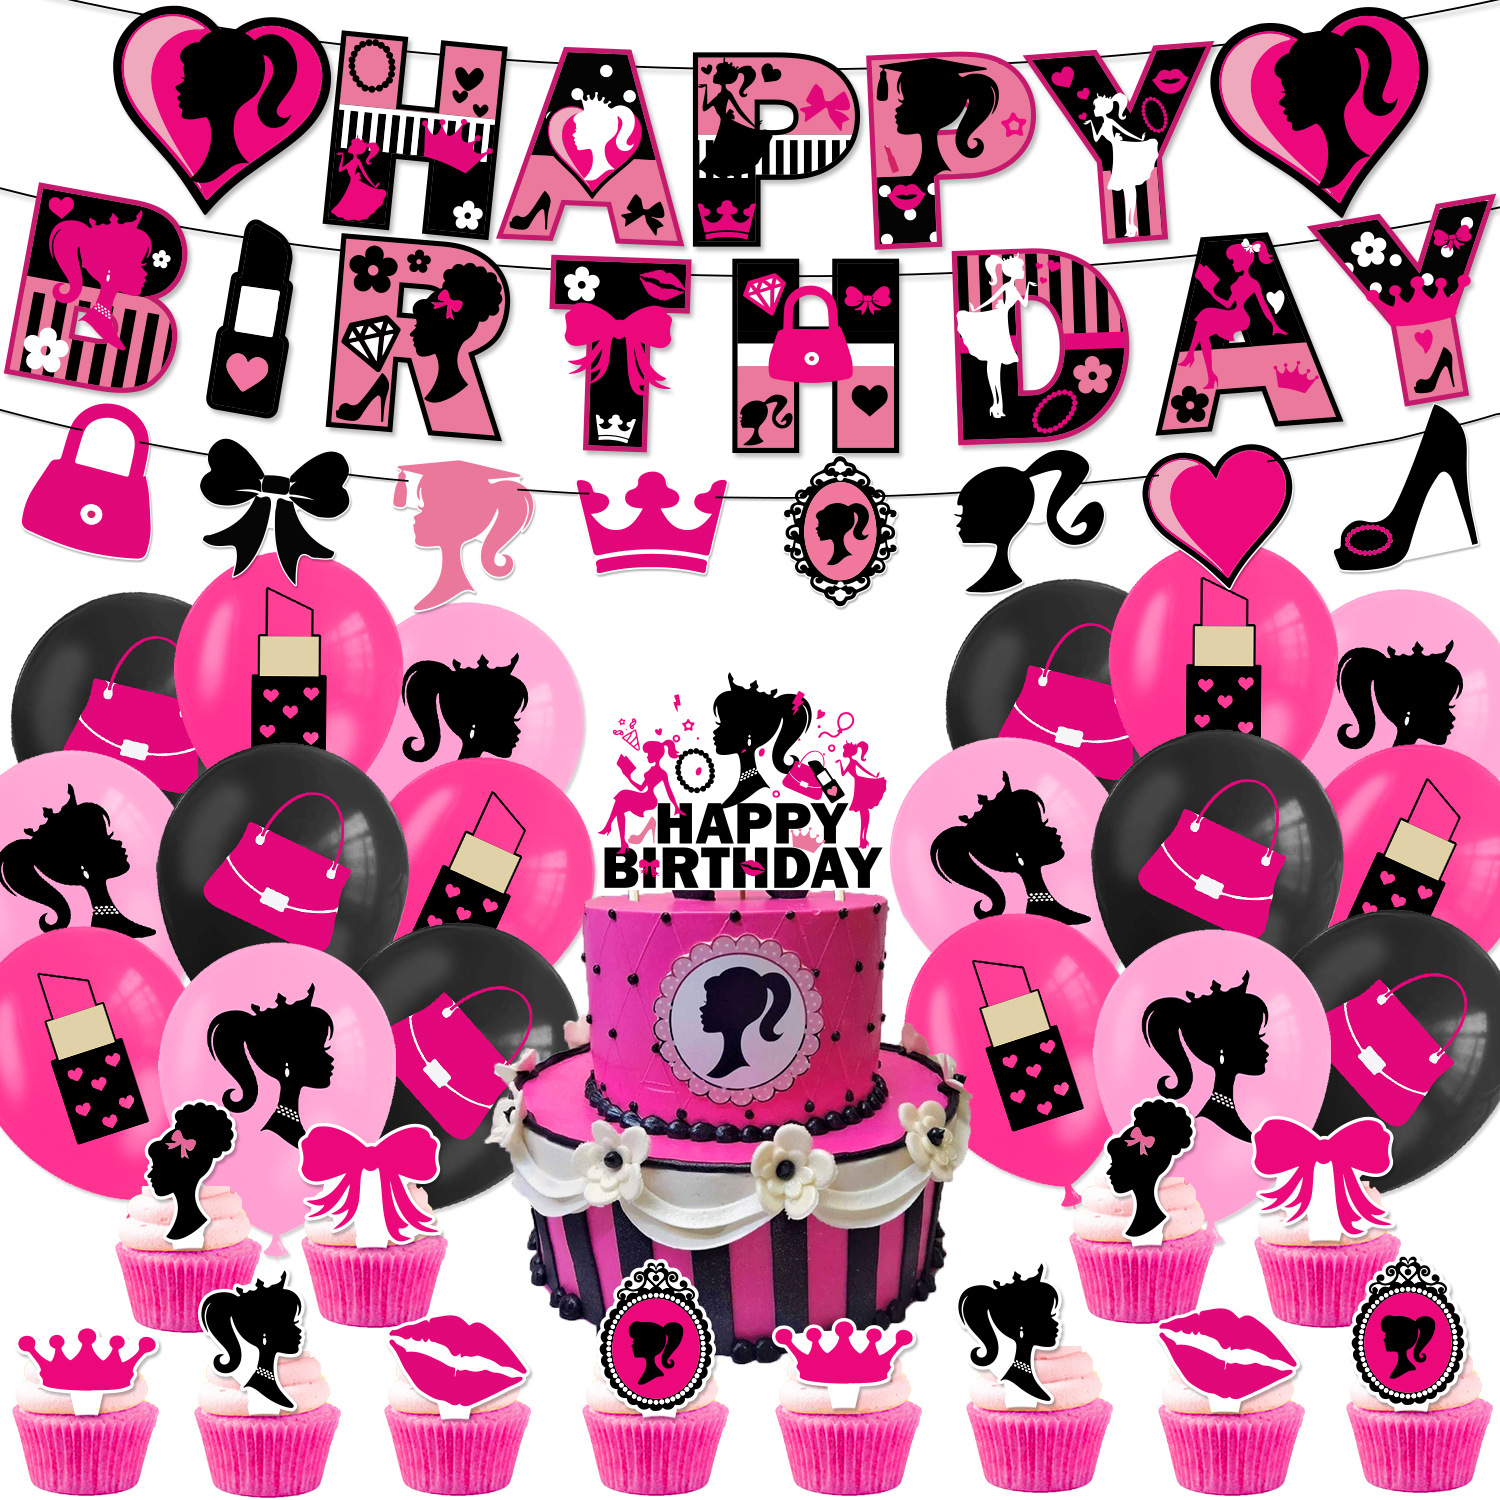 Amazon.com: Rsstarxi 1 Pack Girl Birthday Cake Topper Glitter Crown Girl Birthday  Cake Decoration for Girl Theme Wedding Birthday Baby Shower Party Decoration  Supplies Black : Grocery & Gourmet Food